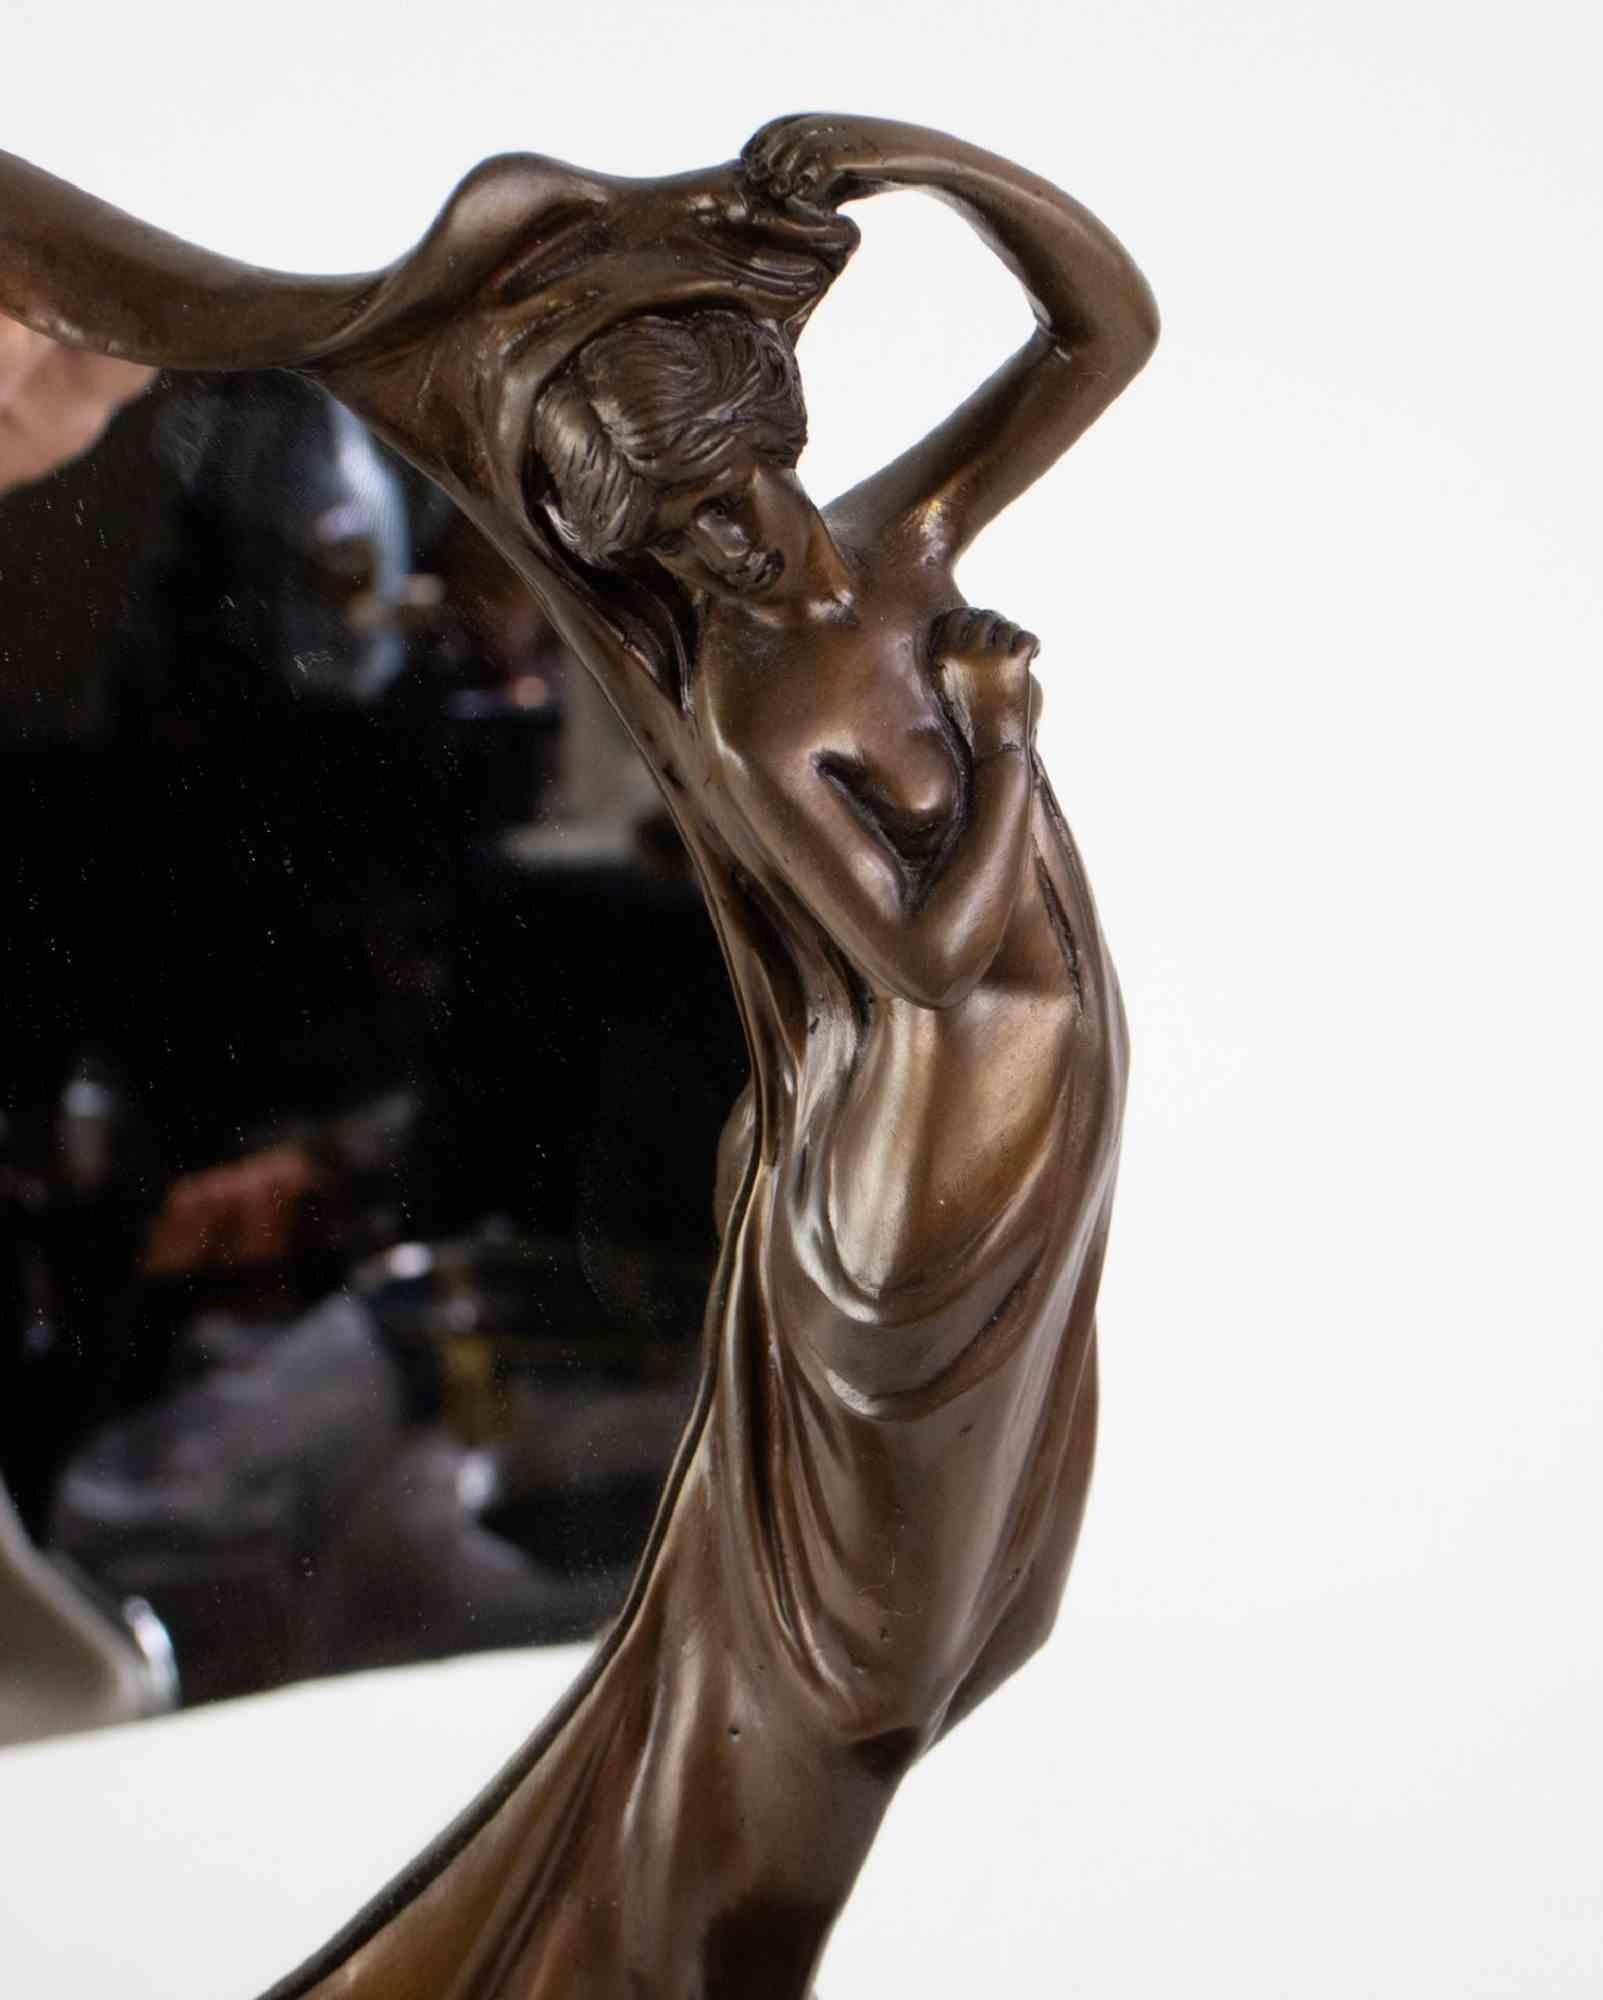 Art Nouveau bronze mirror is an original decorative object realized in the Early 20th Century

An elegant bronze mirror with a bronze female figure on one side. Realized during Art Nouveau period.